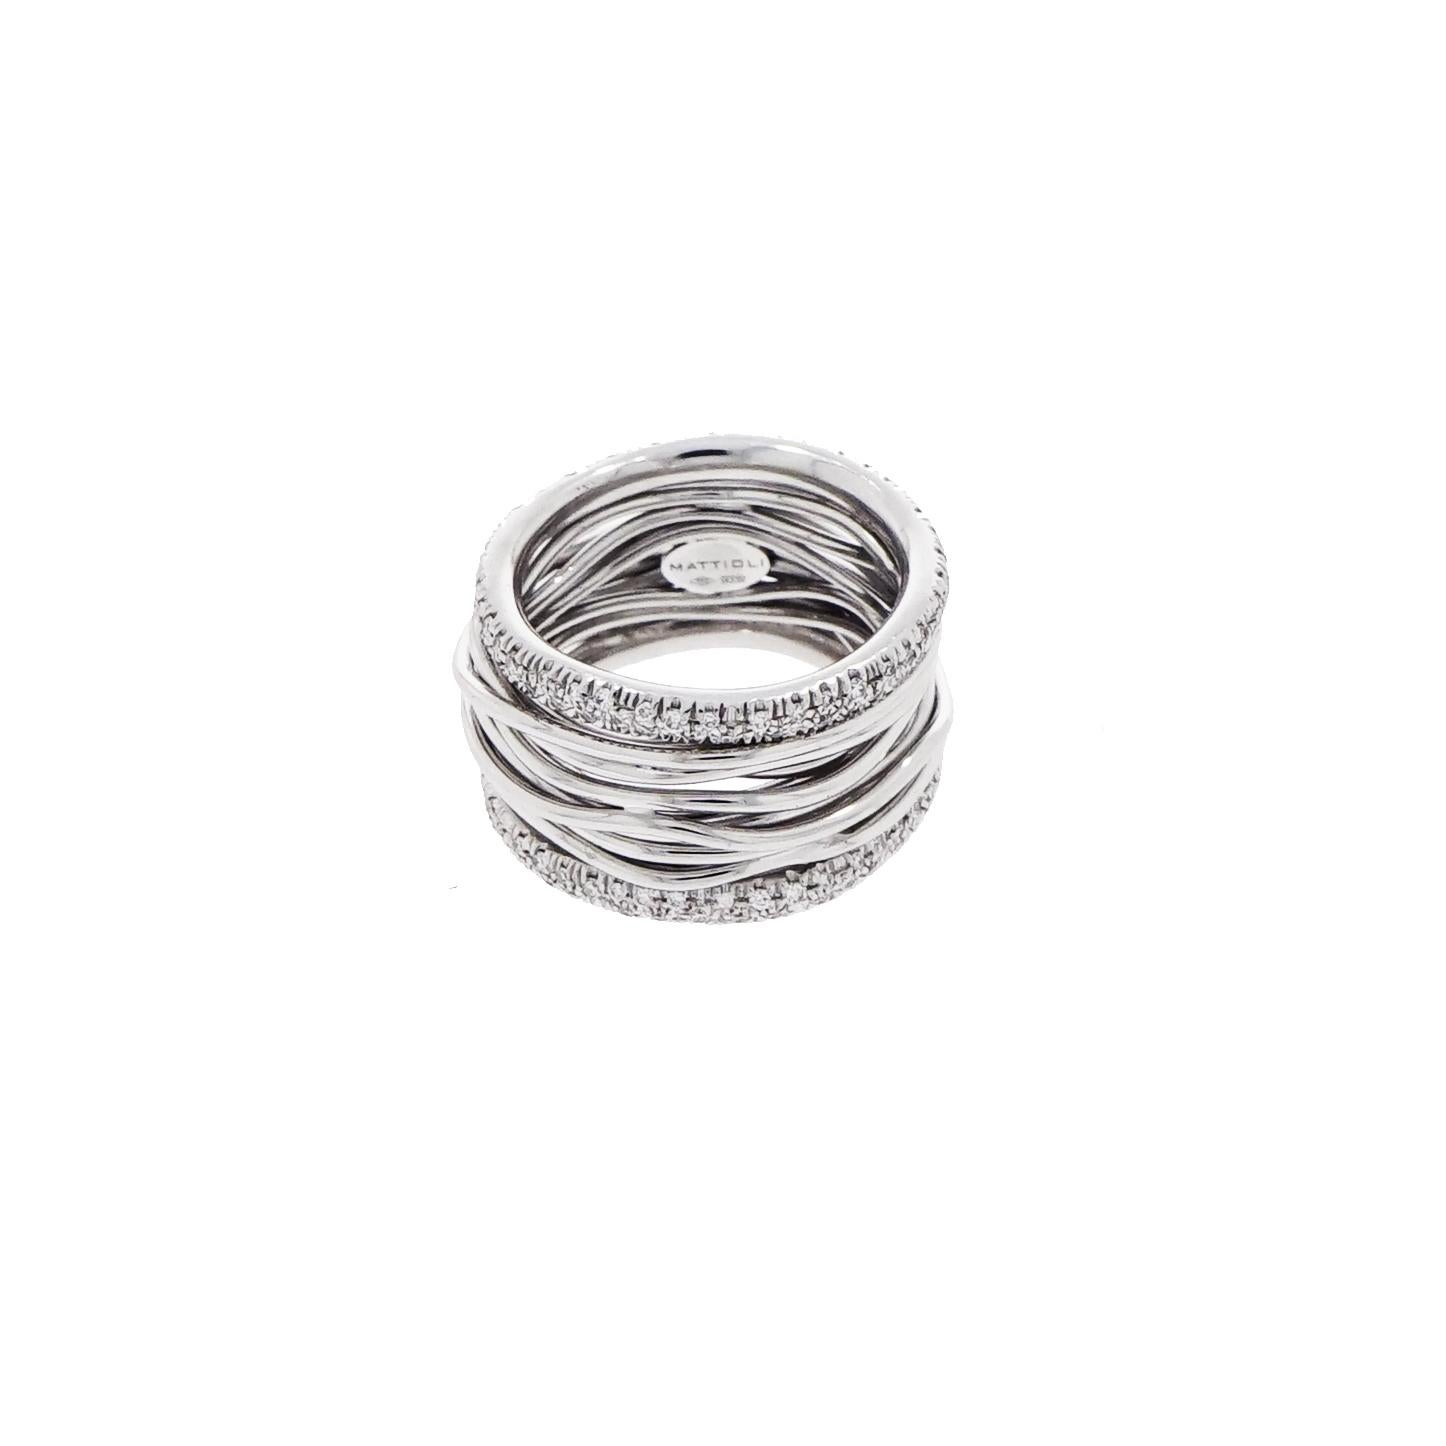 The traditional Himalayan ring is a real story reinterpreted by Mattioli, who called it Tibet in honor of the love legend.
The Tibet Ring is a wish of well being and prosperity added to an invitation to meditate on changes that make every moment